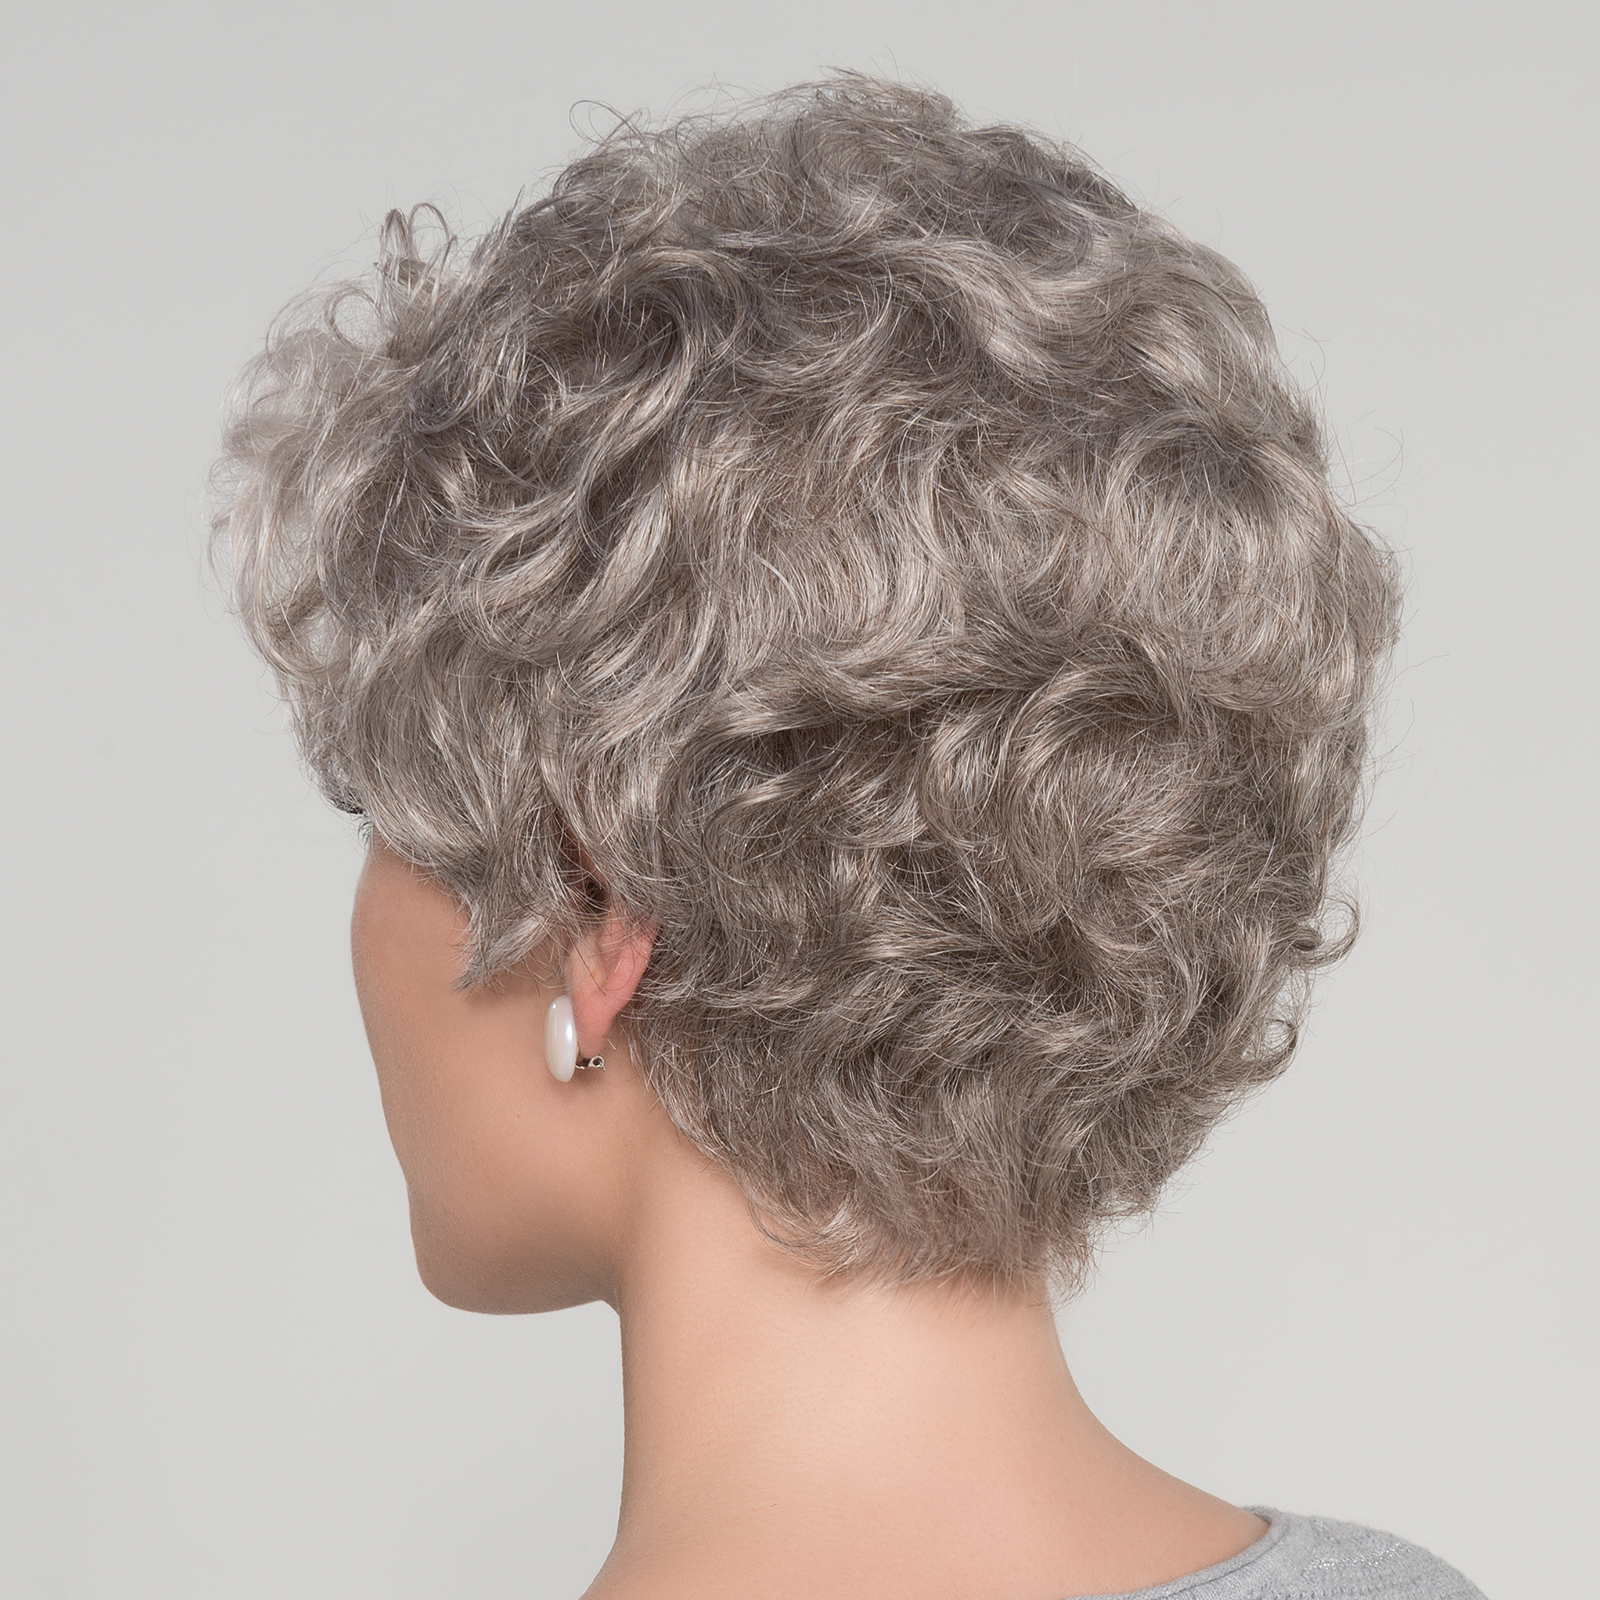 Short Hair Wigs Australia  - Buy Online with AfterPay!